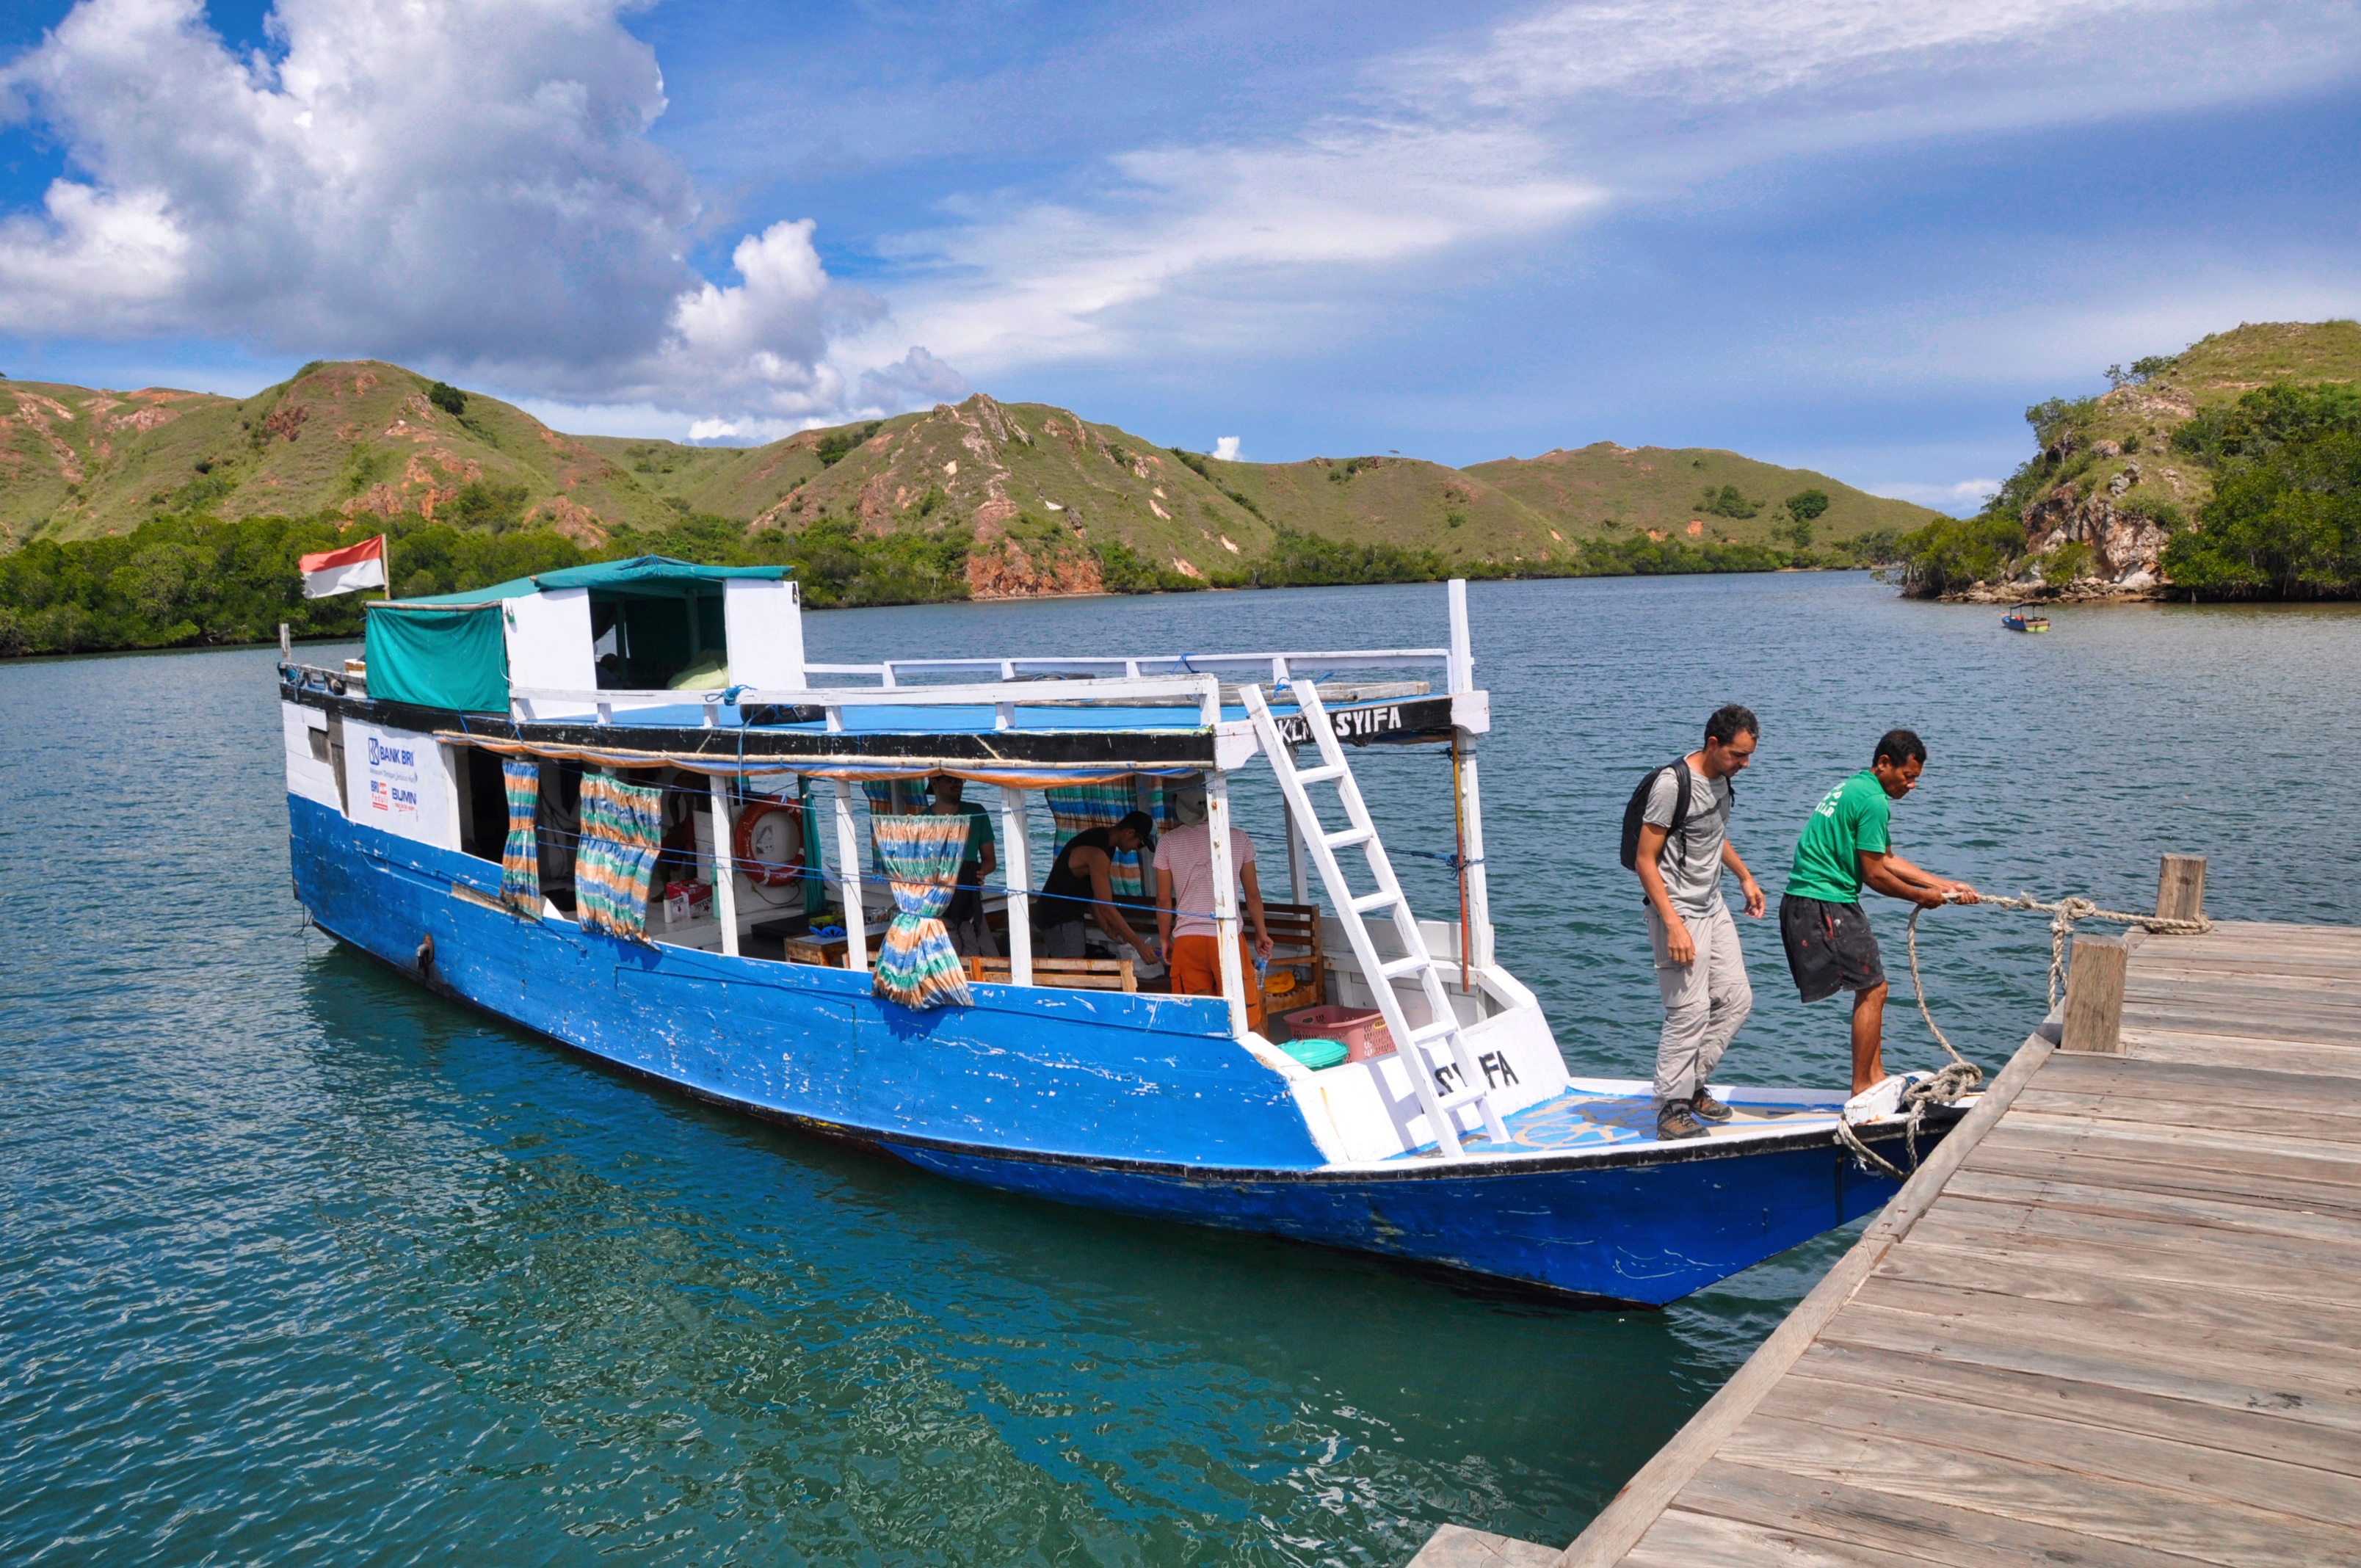 Two Travel The World - Komodo Tour Package: Komodo National Park on a 2 day boat tour.